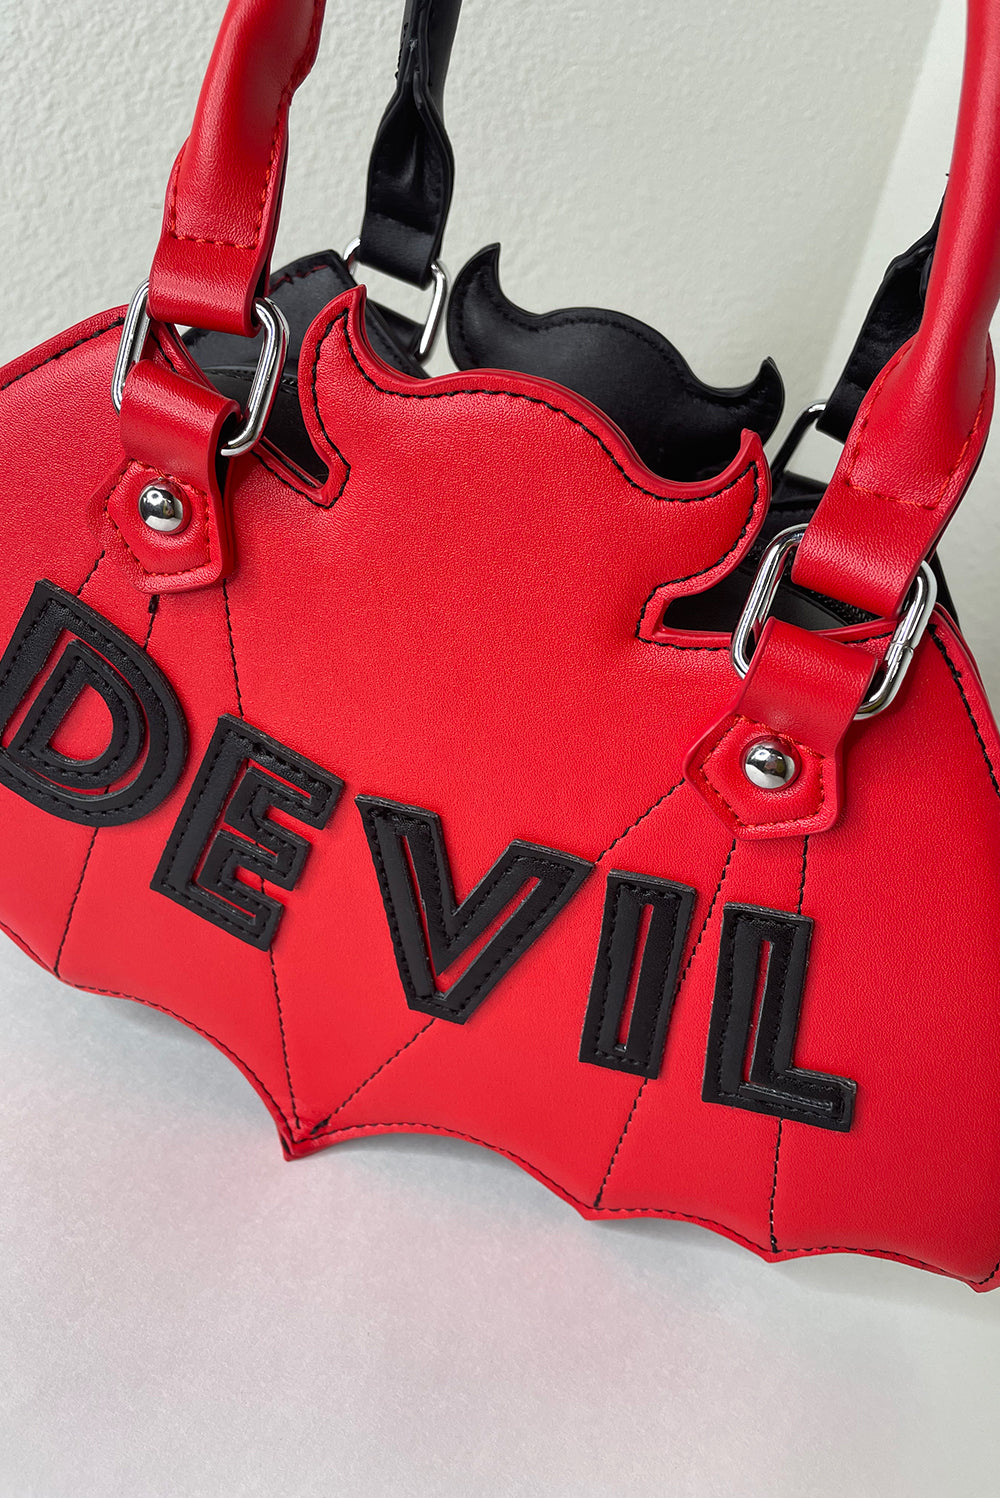 Devil / Evil Double Sided Purse - SOLD OUT